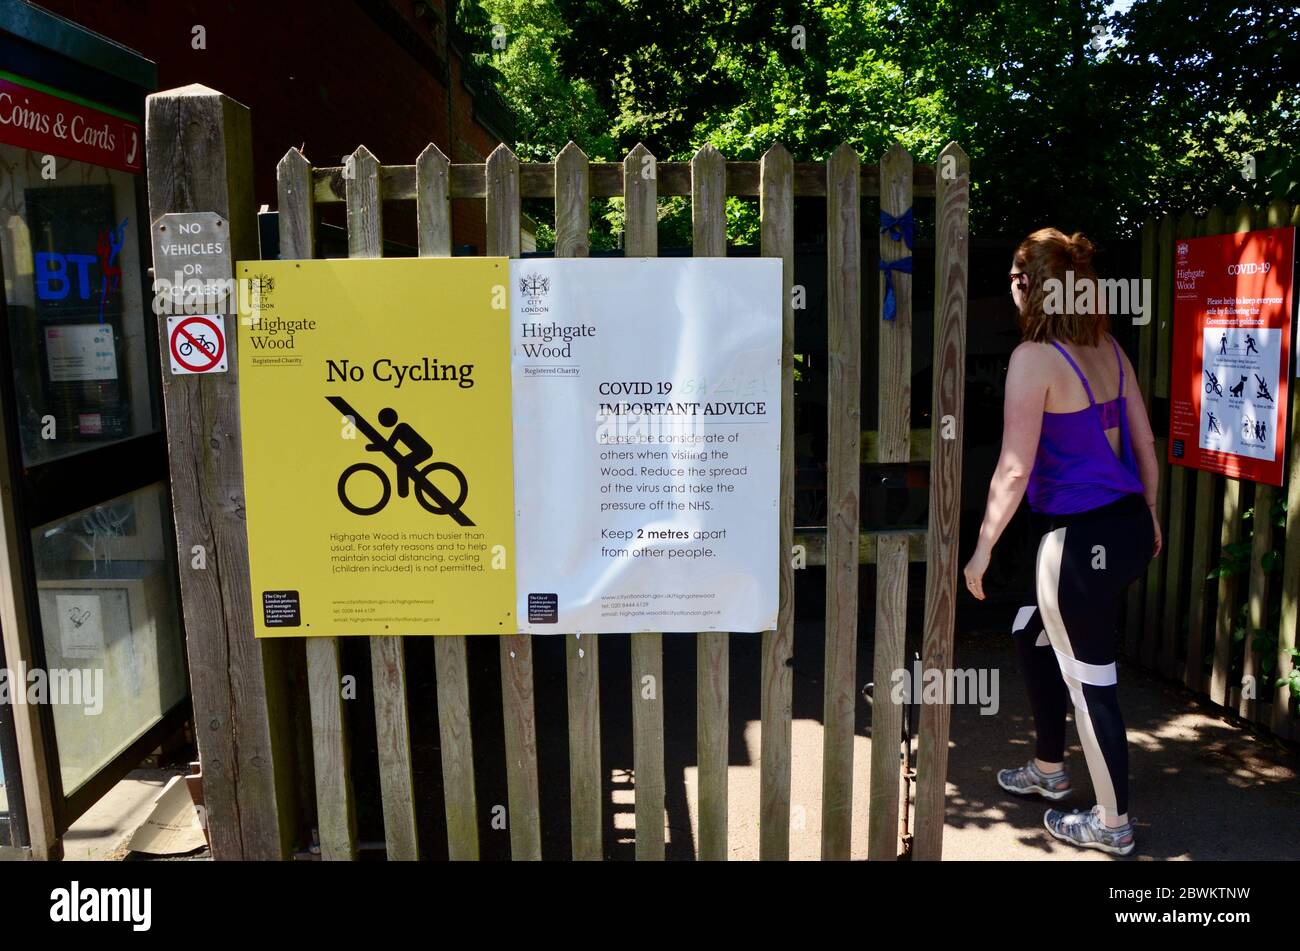 highgate wood london england covid 19 pandemic 2020 no cycling and government guidelines signs Stock Photo